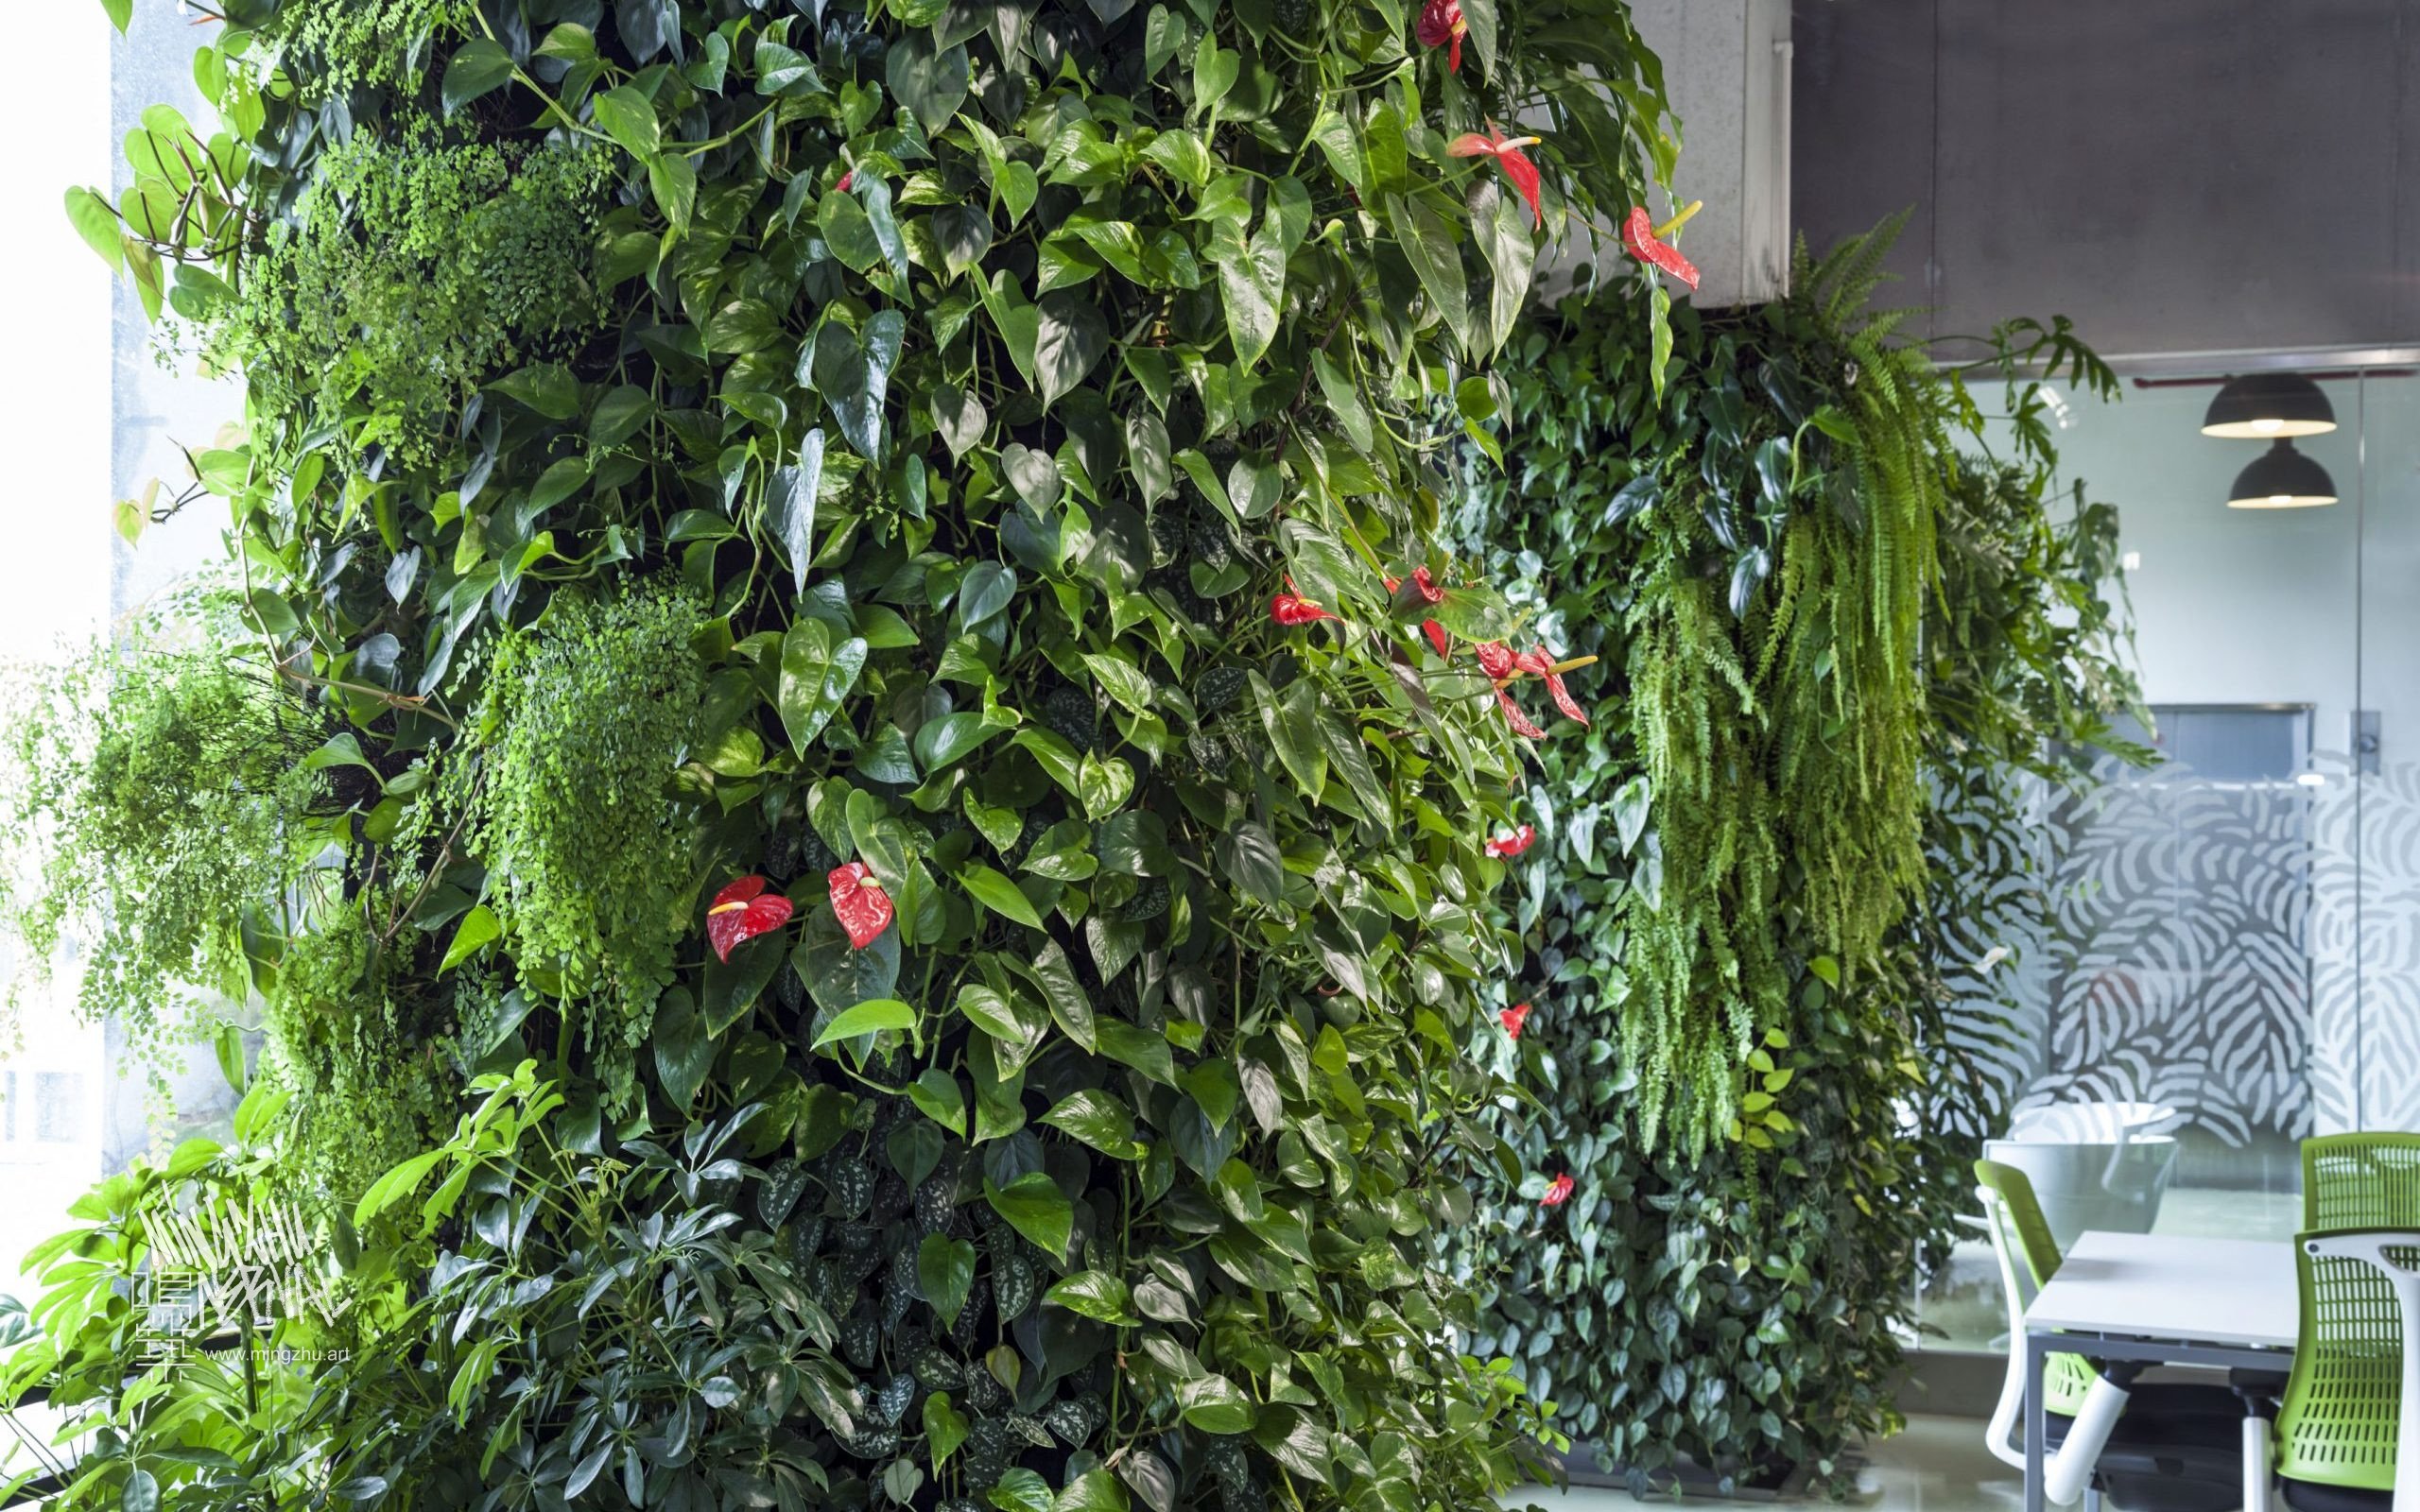 Mingzhu Nerval vertical living wall experts created the healthy nature workspace for the Dawnfinder offices in Shanghai, 2012